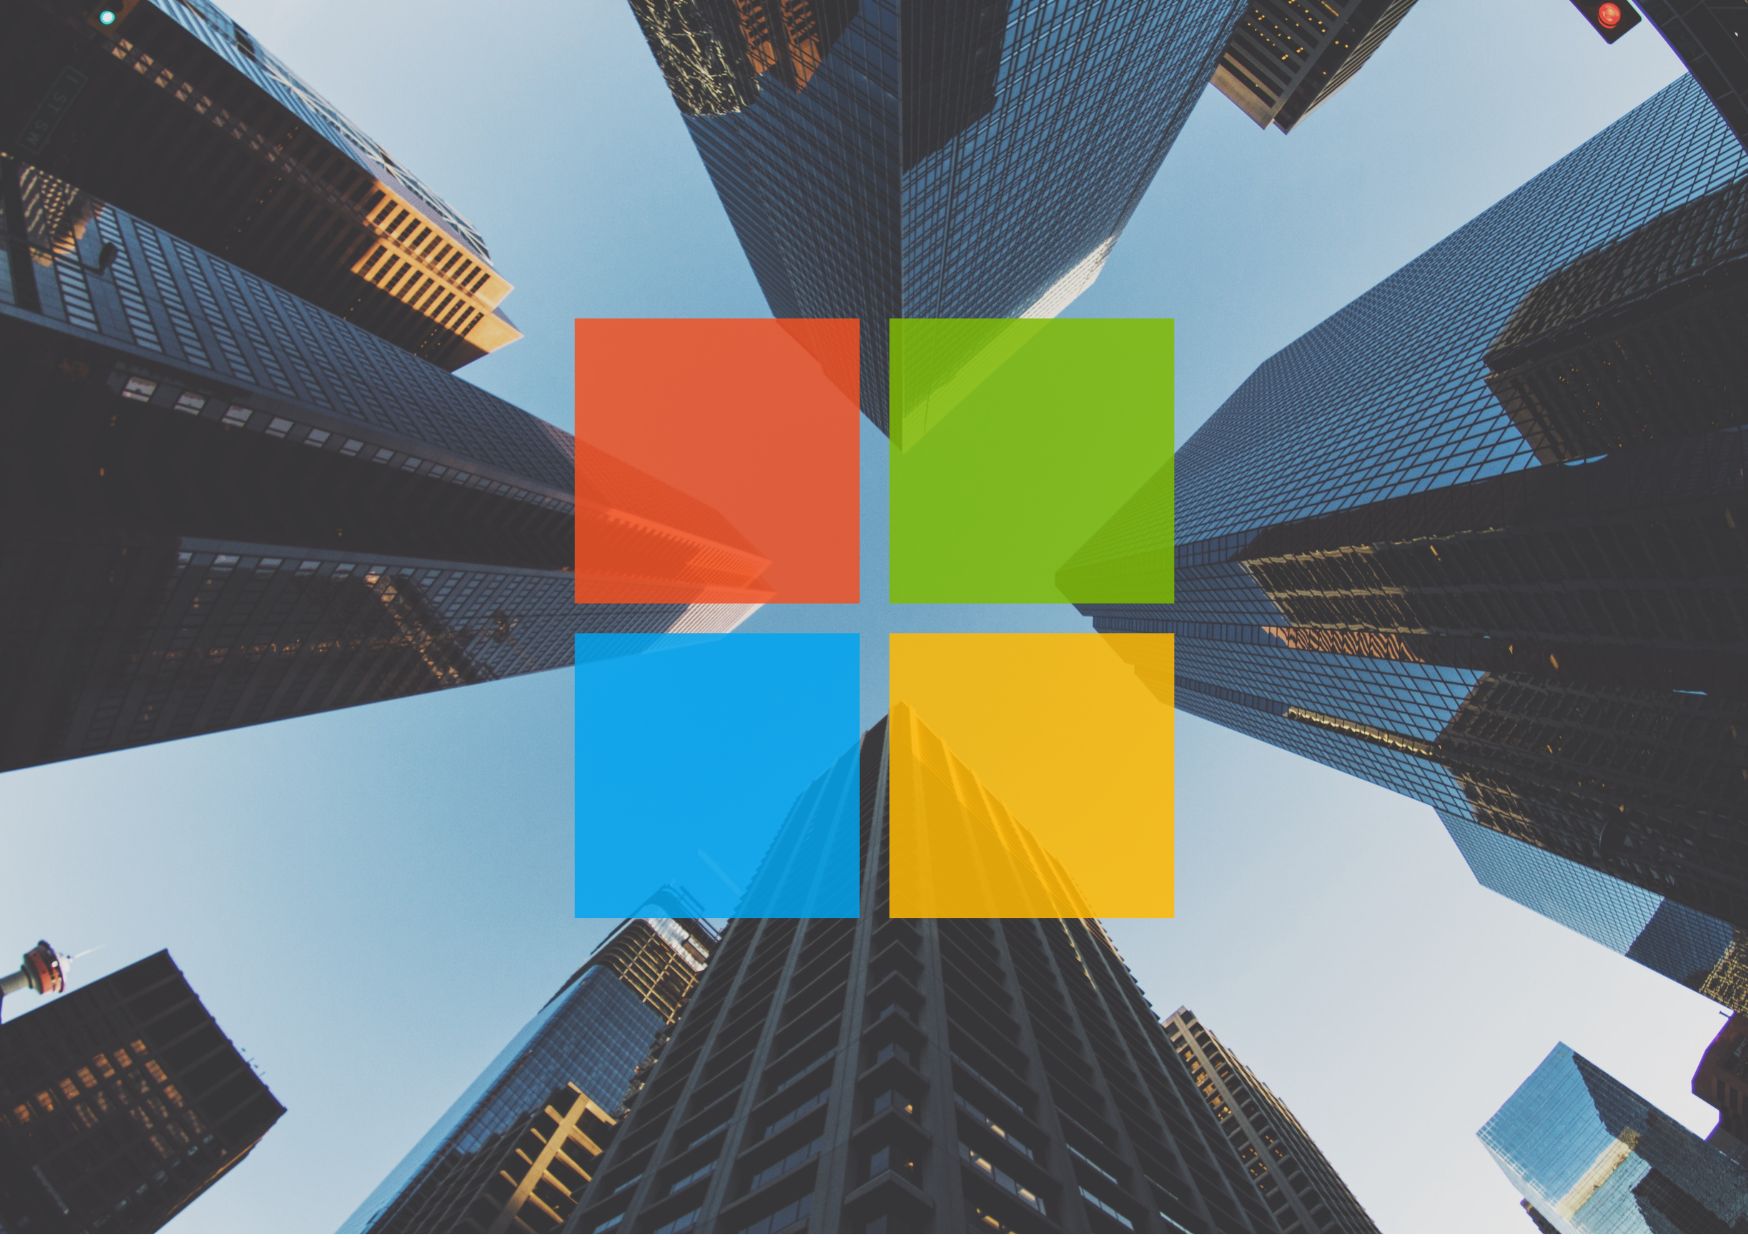 Featured image: Microsoft logo overlaid on city high rise buildings. - How will the Microsoft licensing fee increases impact your business?